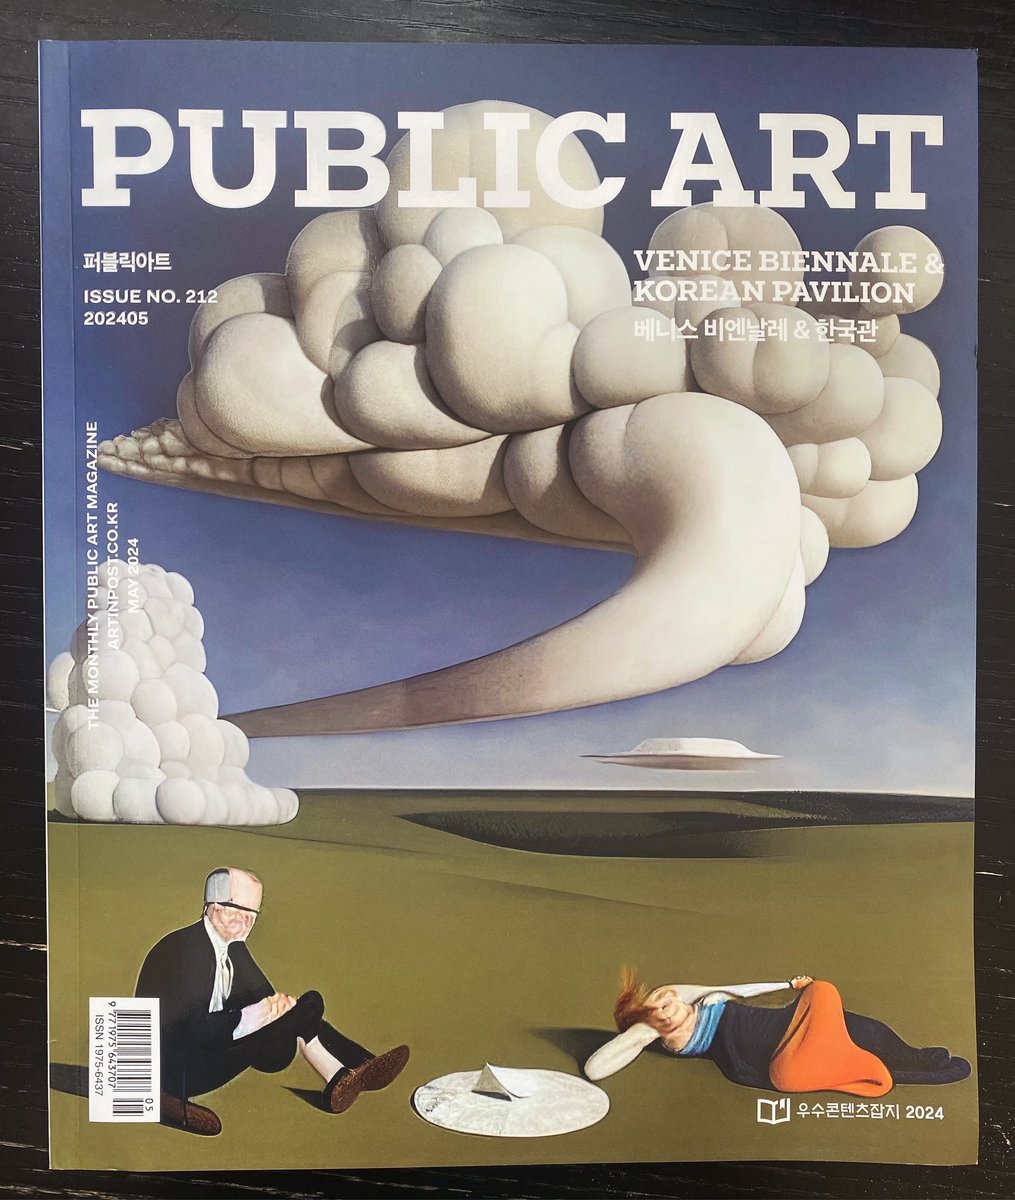 An old generation made the cover of Public Art magazine in Korea!